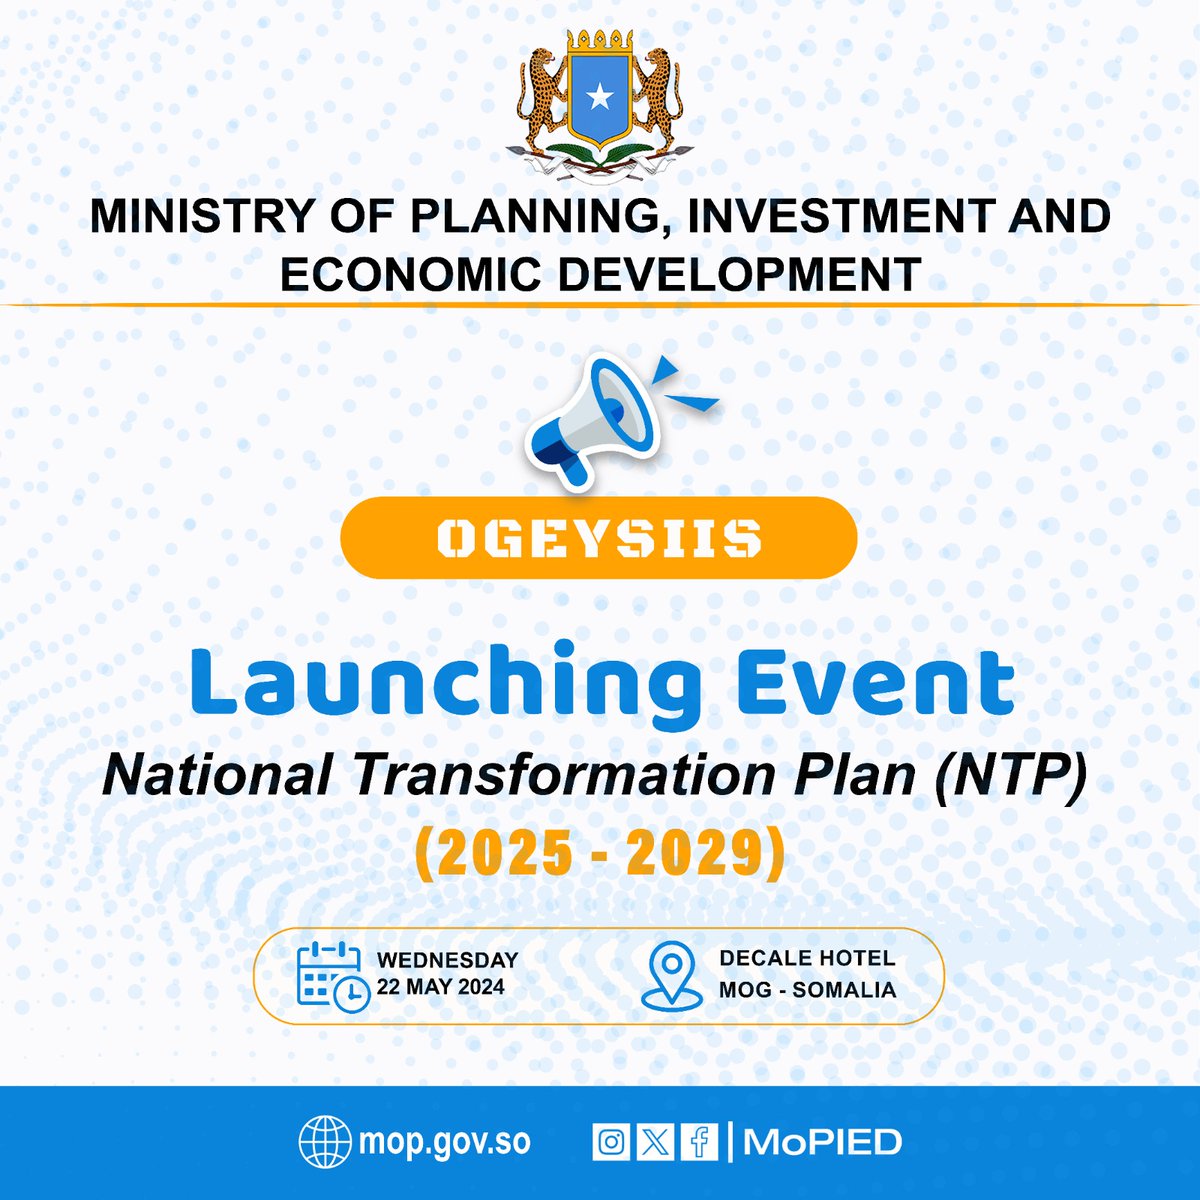 The Federal Government of Somalia, through @MoPIED_Somalia, is proud to introduce the National Transformation Plan (NTP) 2025-2029. This strategic roadmap will guide Somalia's development efforts, focusing on economic growth, social progress, and environmental resilience.